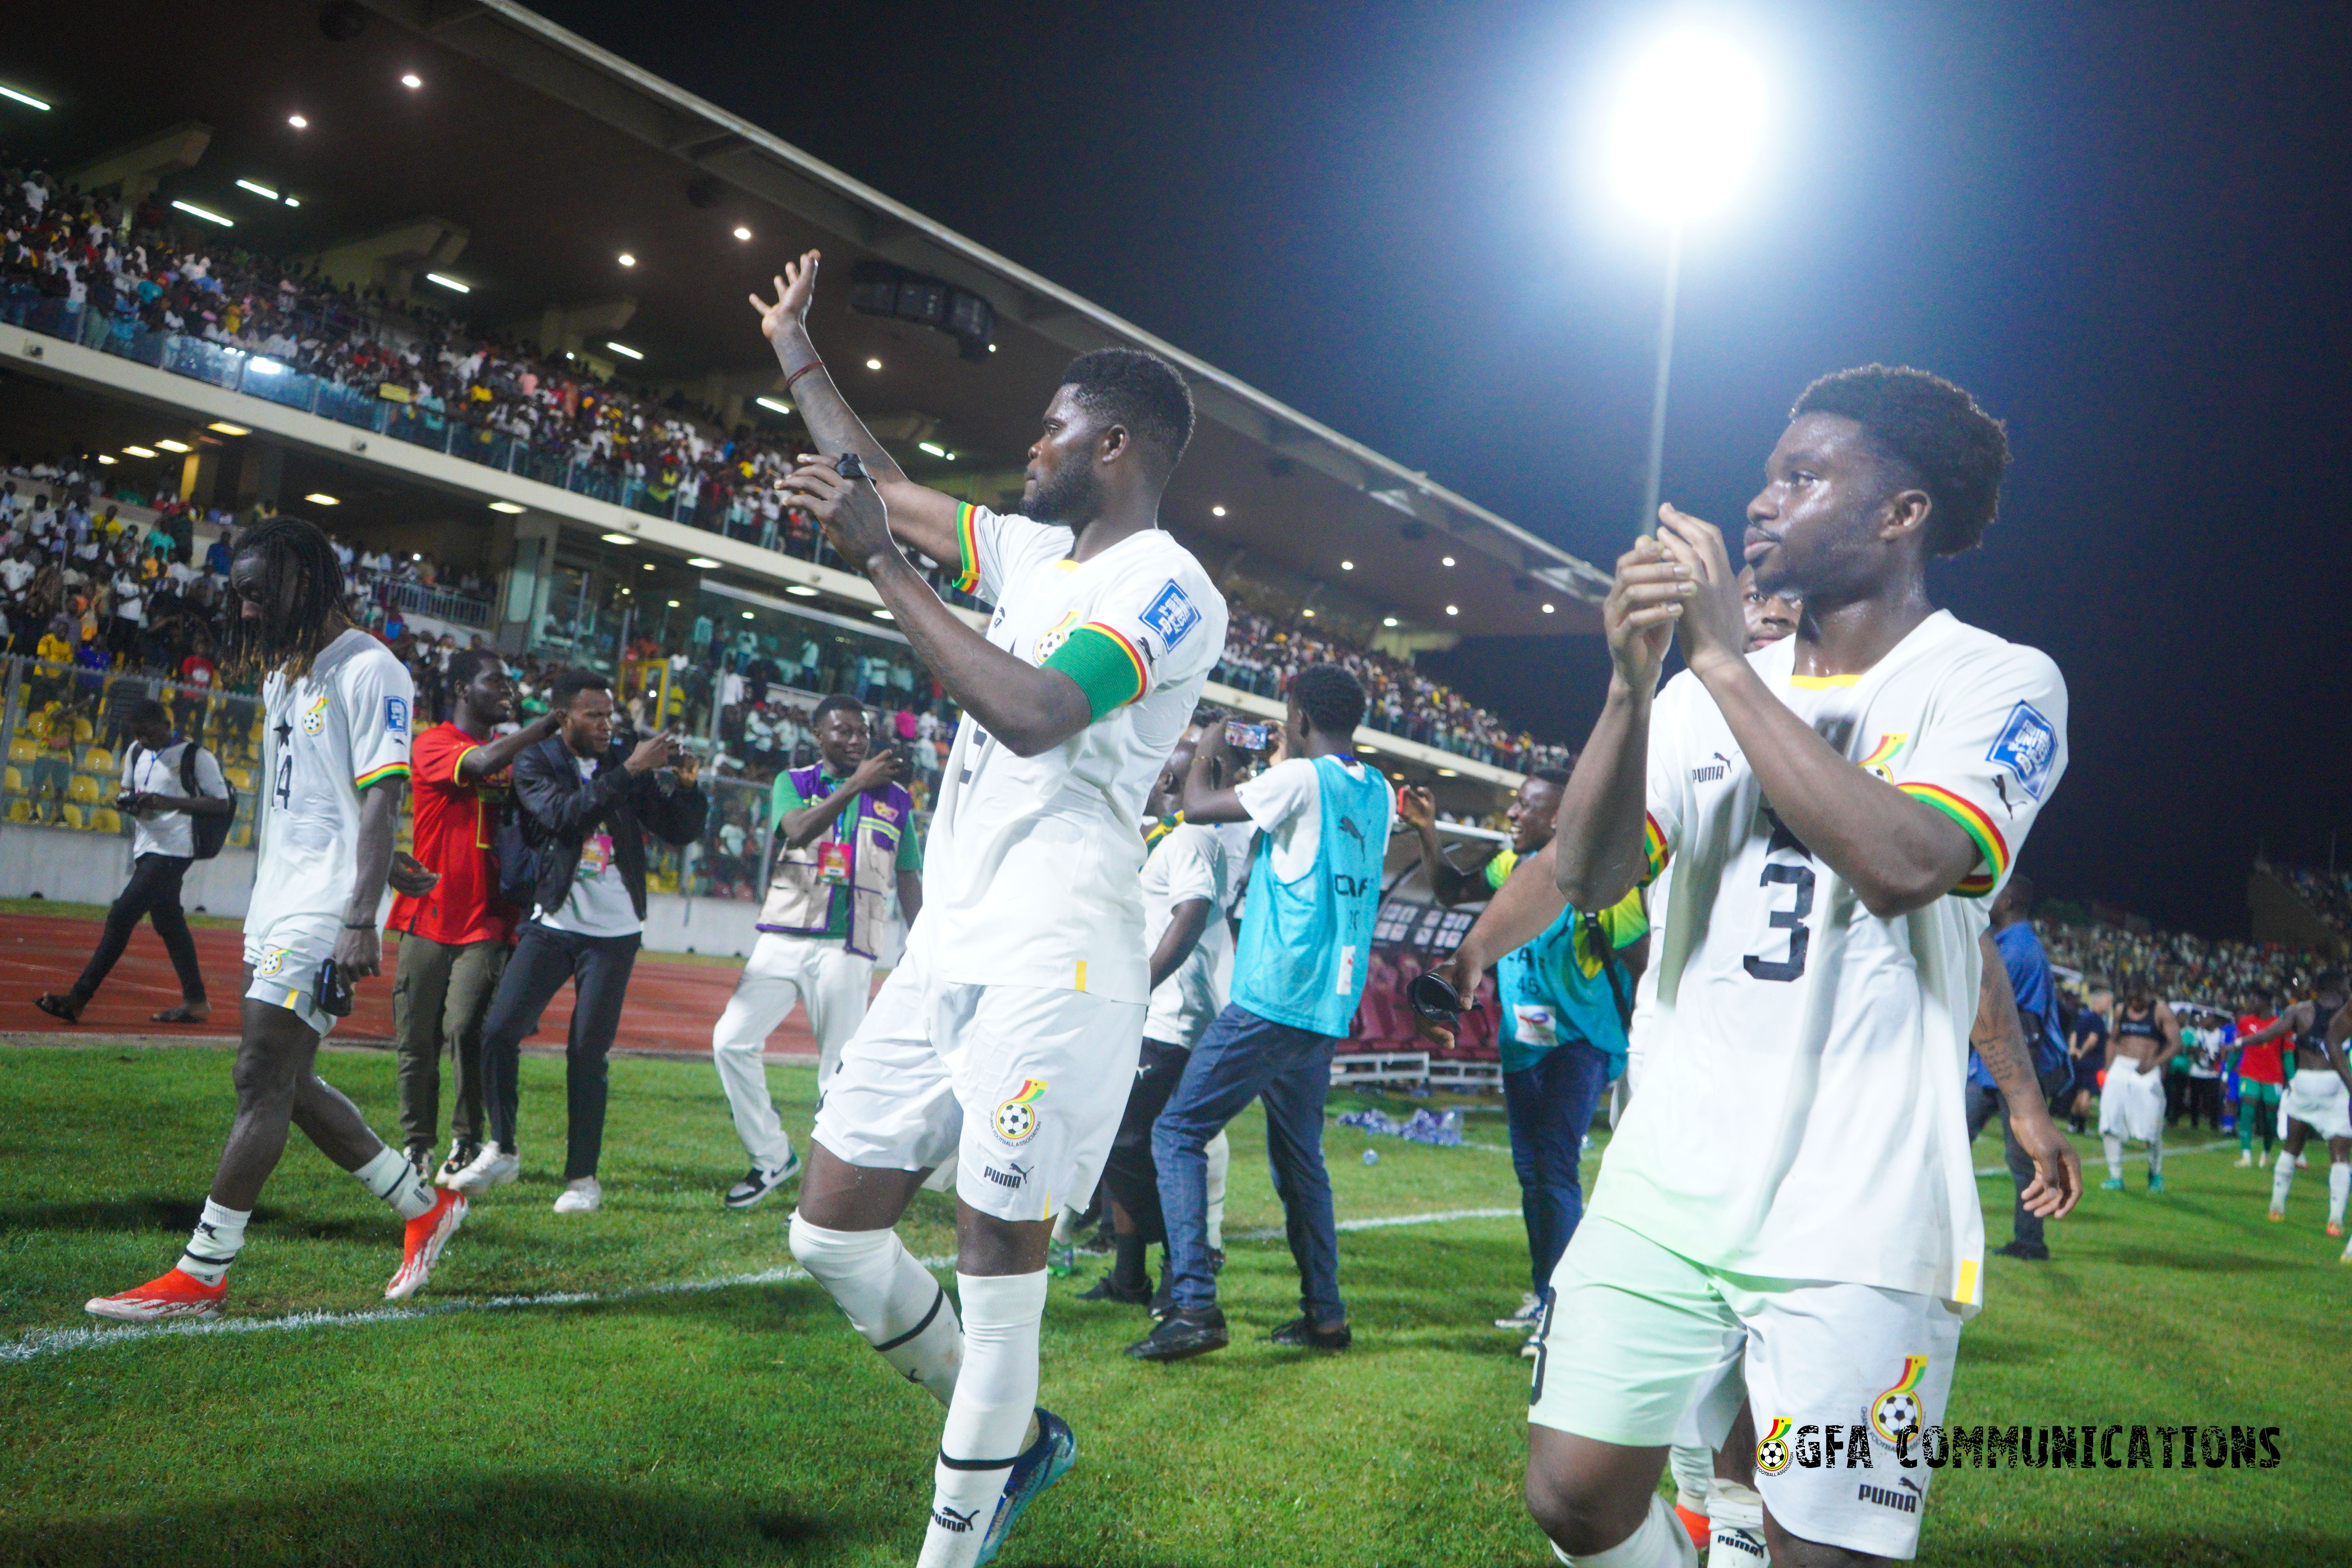 GFA salutes all for massive support during FIFA World Cup qualifier on Monday